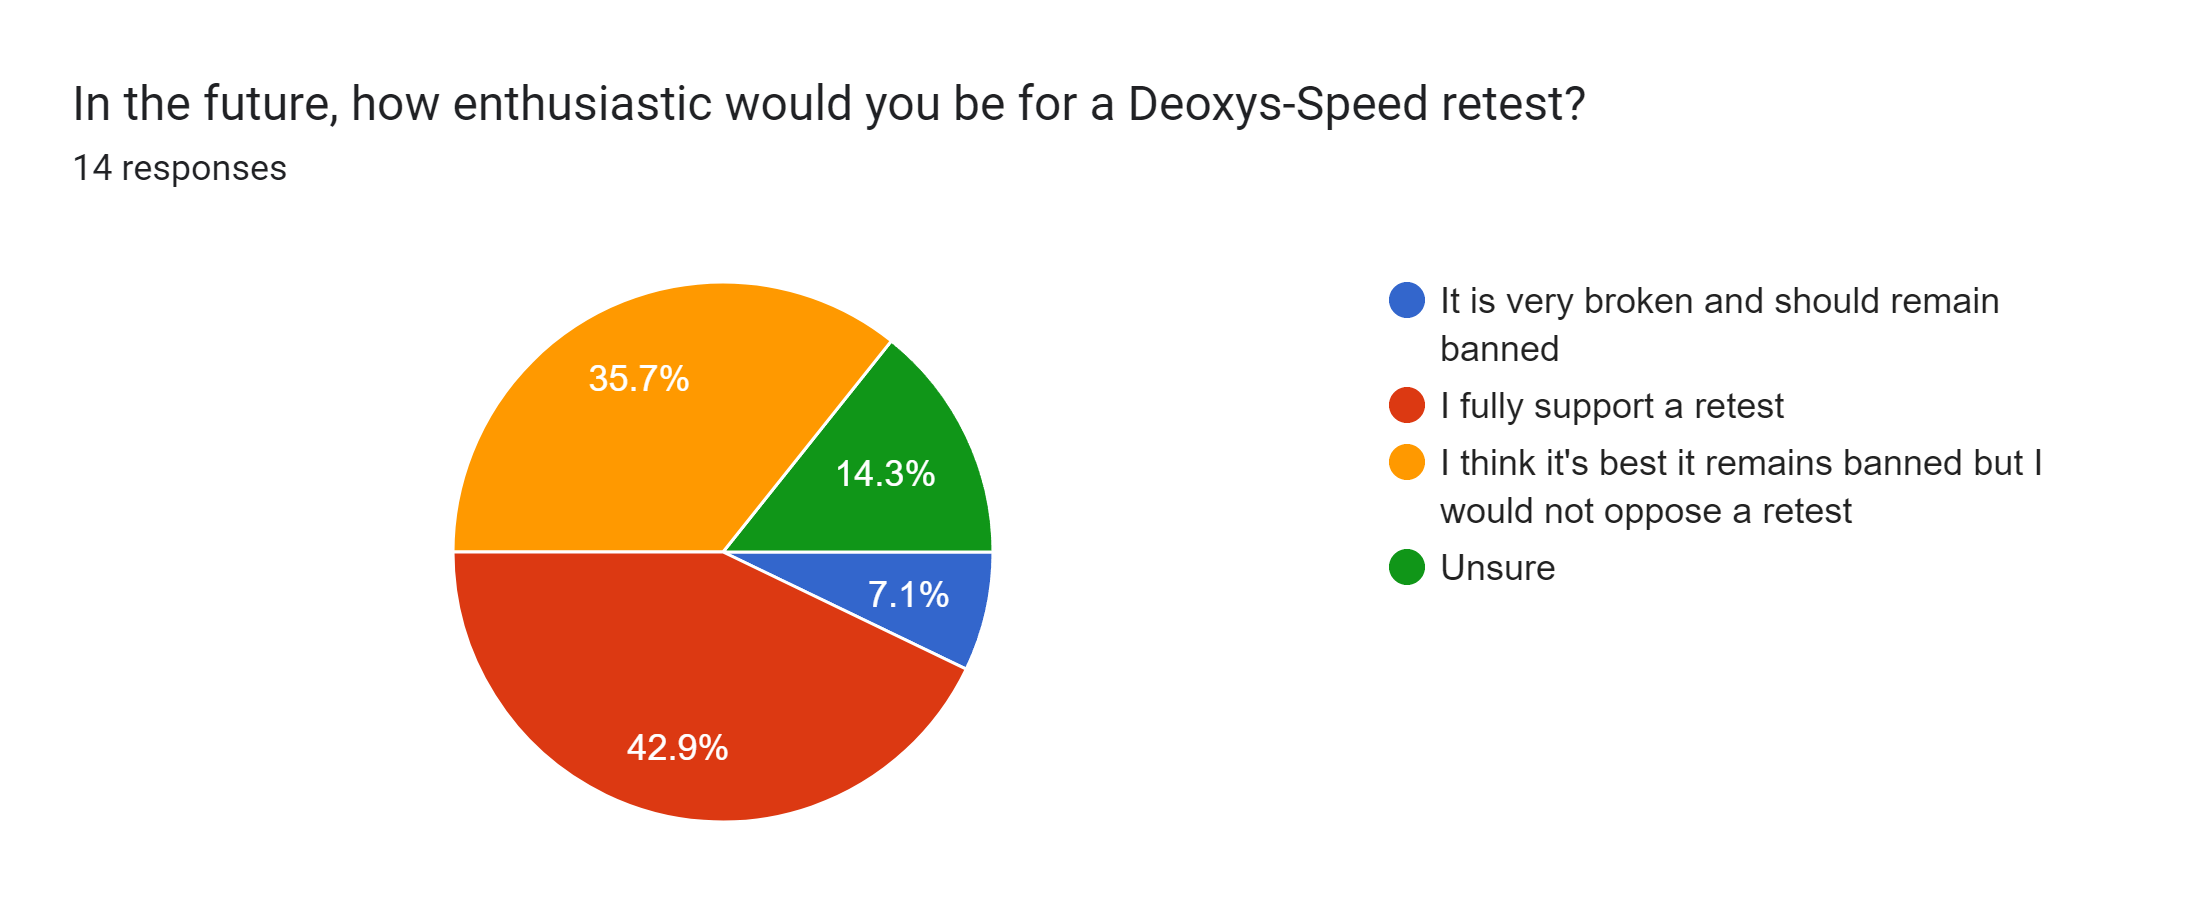 Forms response chart. Question title: In the future, how enthusiastic would you be for a Deoxys-Speed retest?. Number of responses: 14 responses.